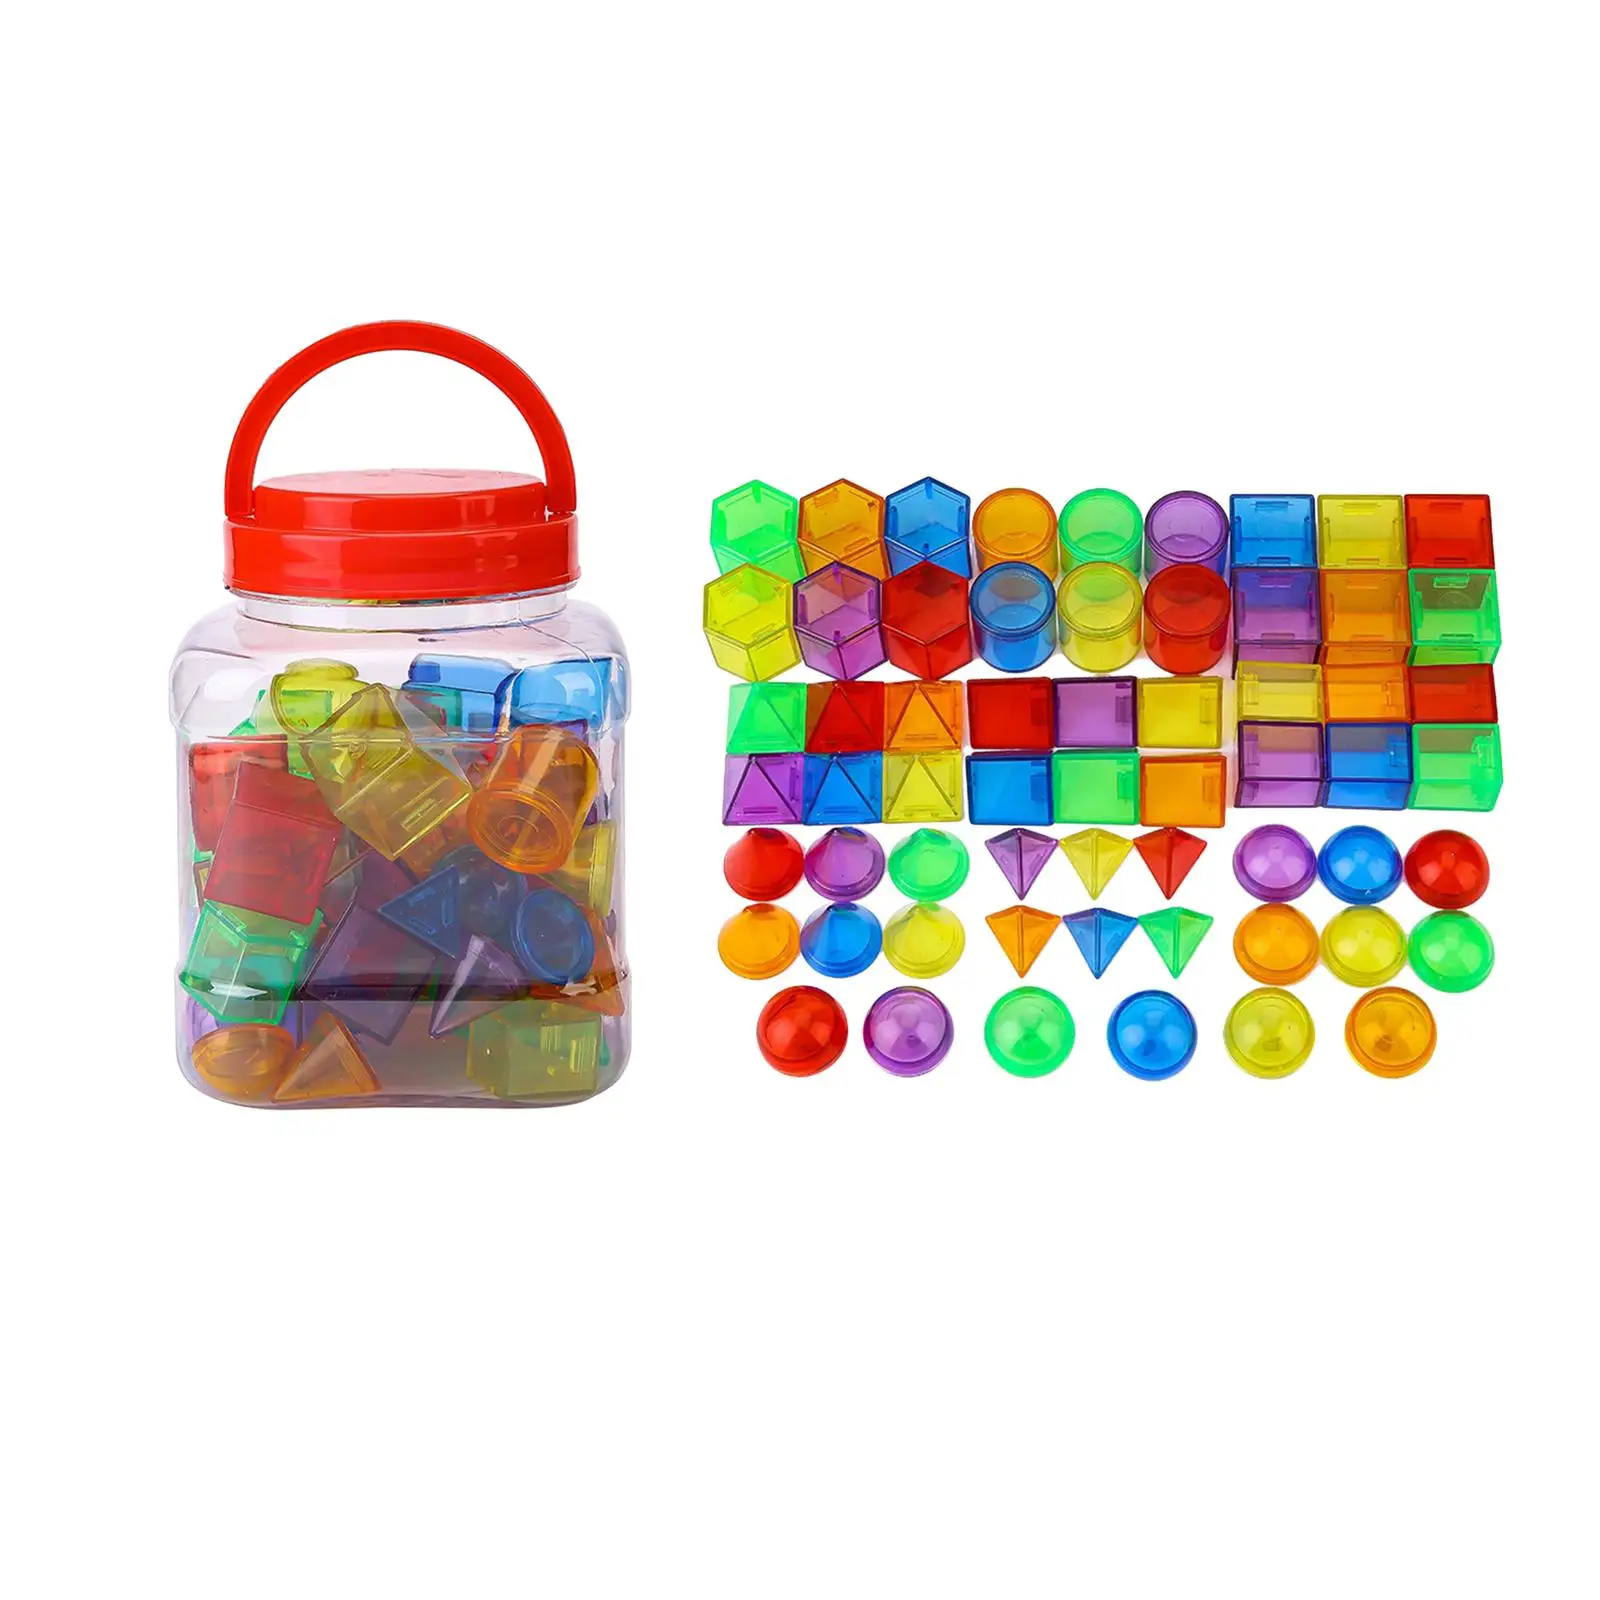 Geometric Solids Montessori Toys Colourful Detachable for Gifts Living Room